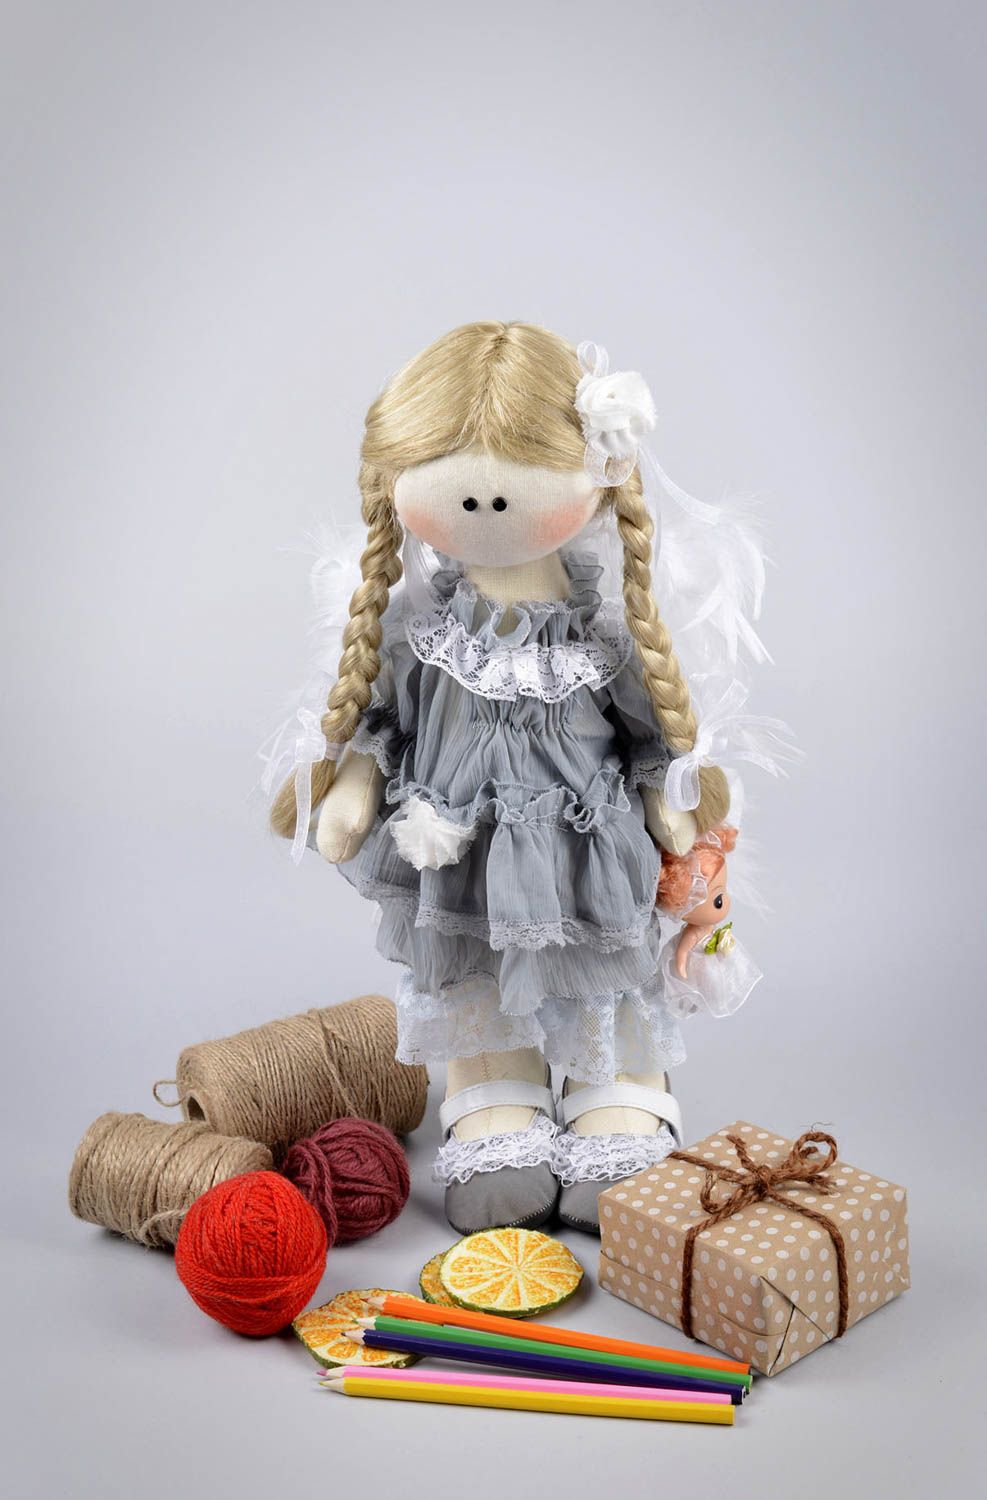 Handmade soft toy girl doll collectible dolls best gifts for girls stuffed toy photo 5